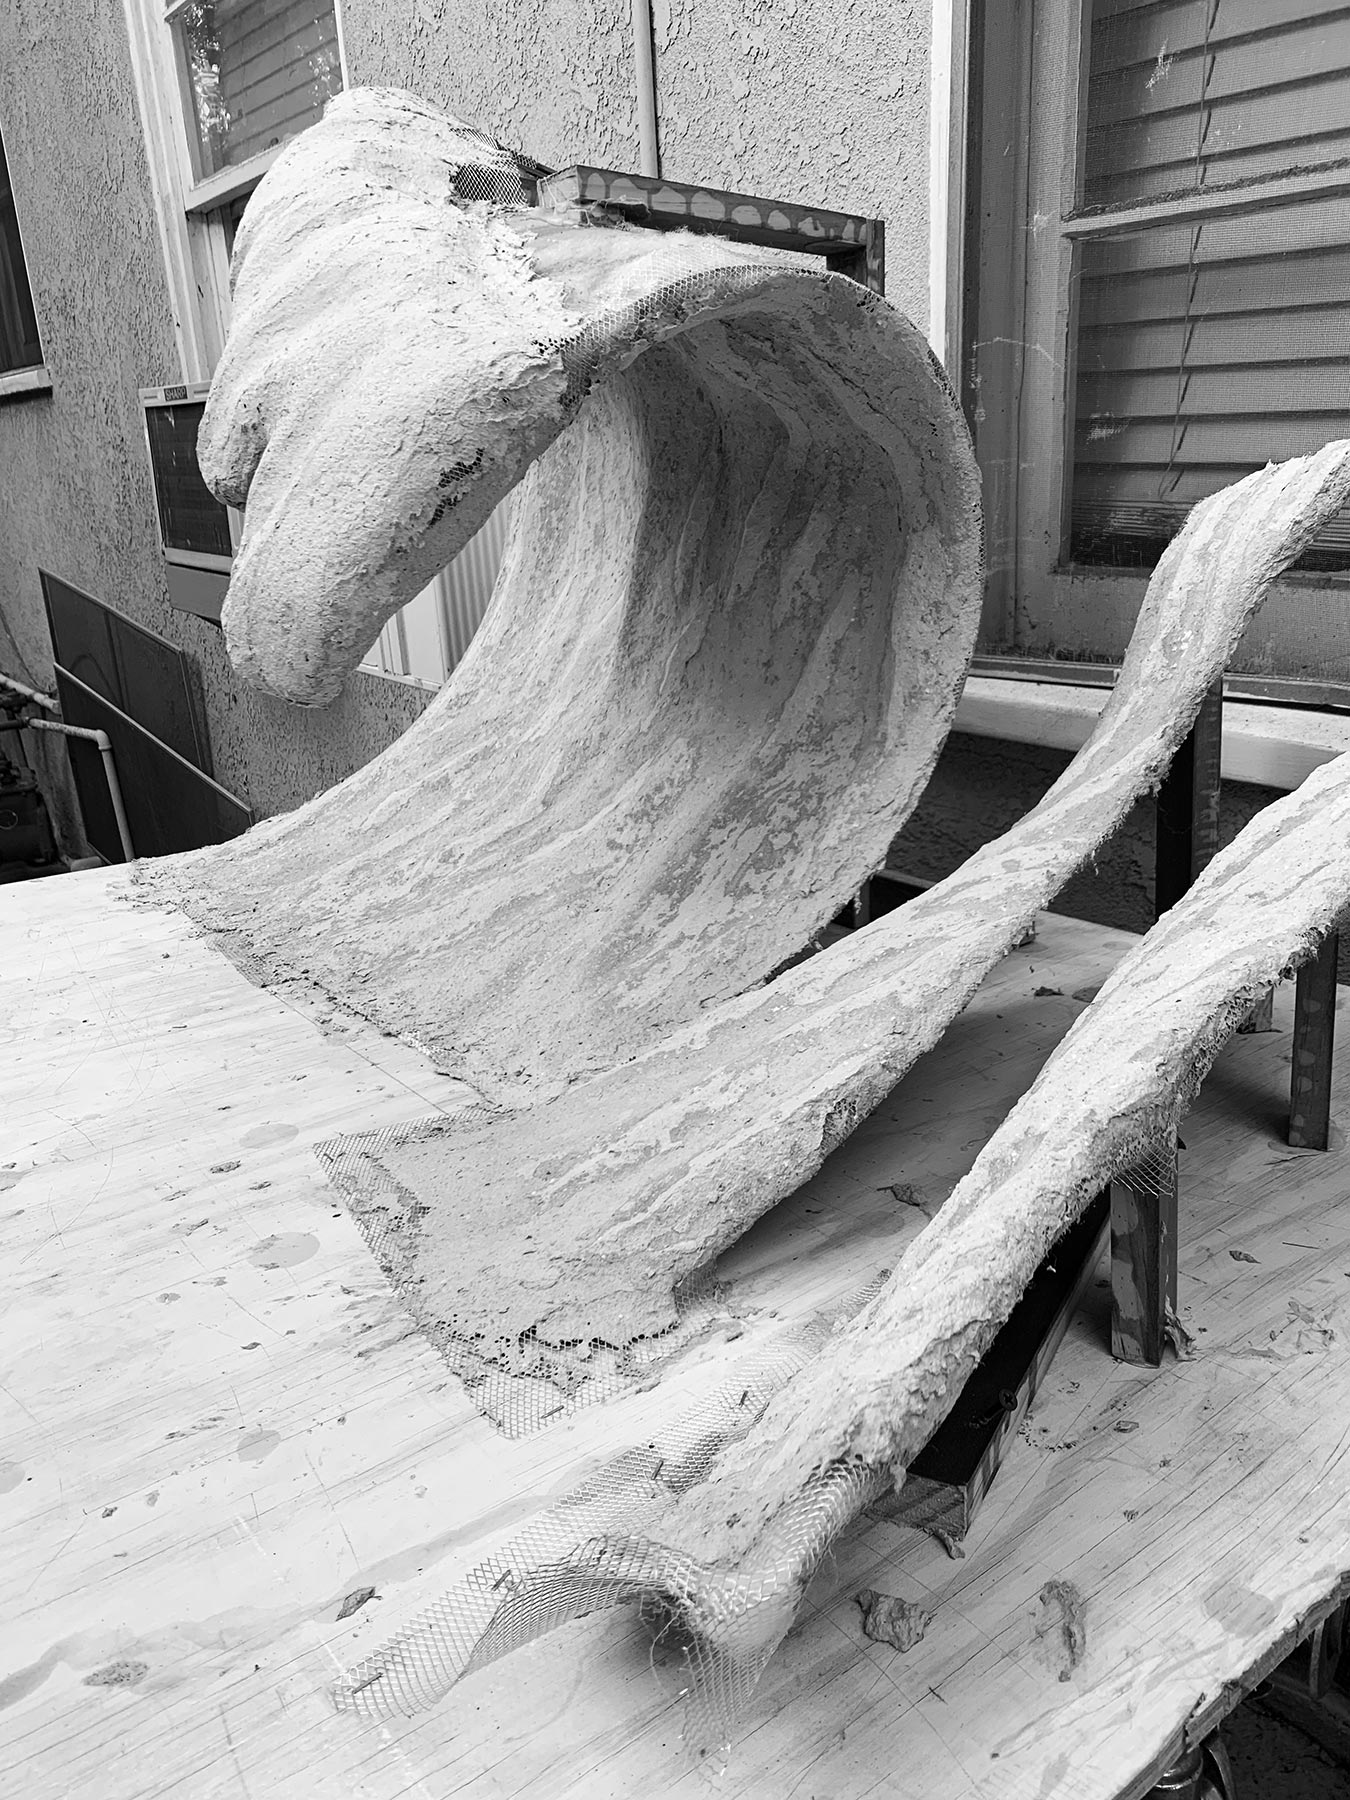 ...paper pulp with a binder is applied to the sculpture...